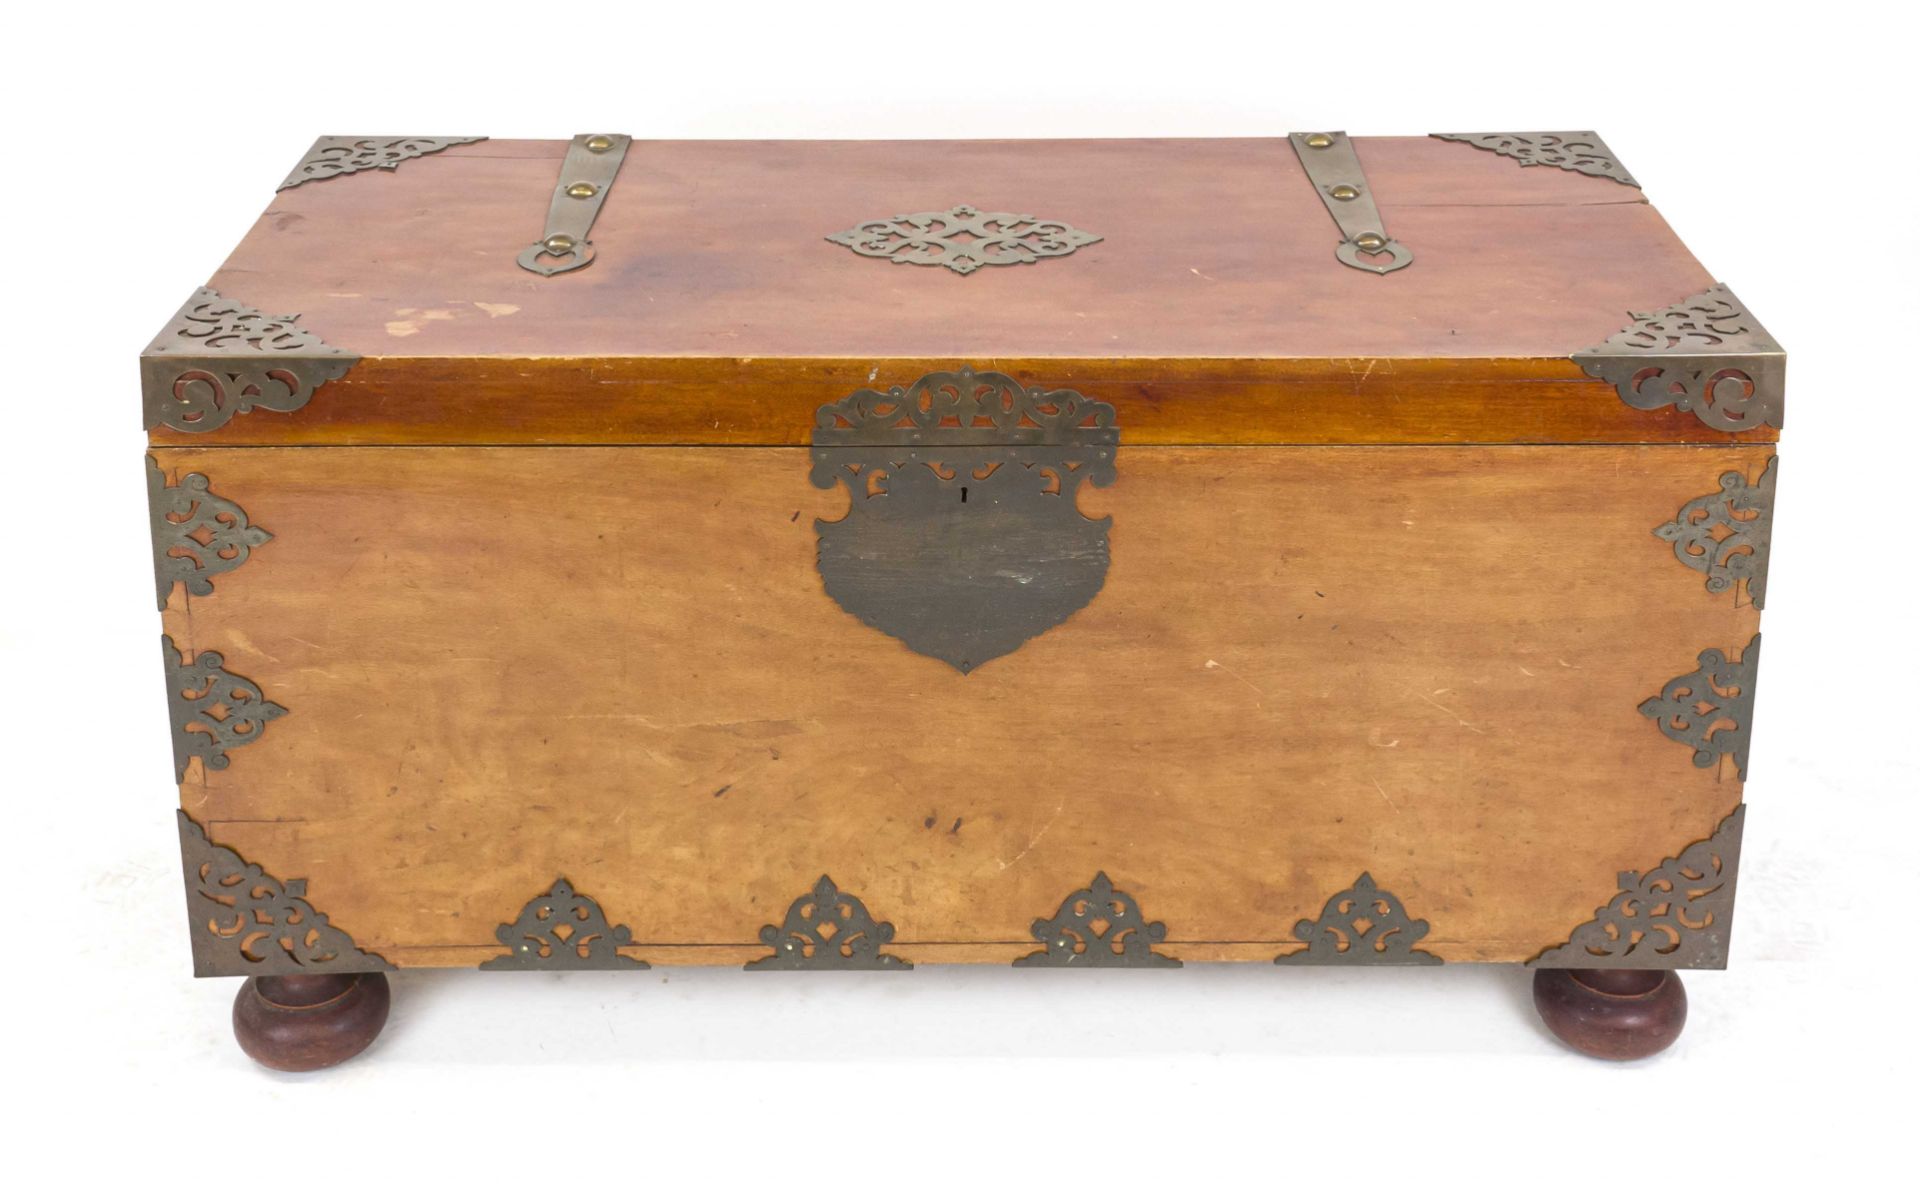 Large Asian cedar wood chest, typical brass fittings all around, 72 x 130 x 58 cm